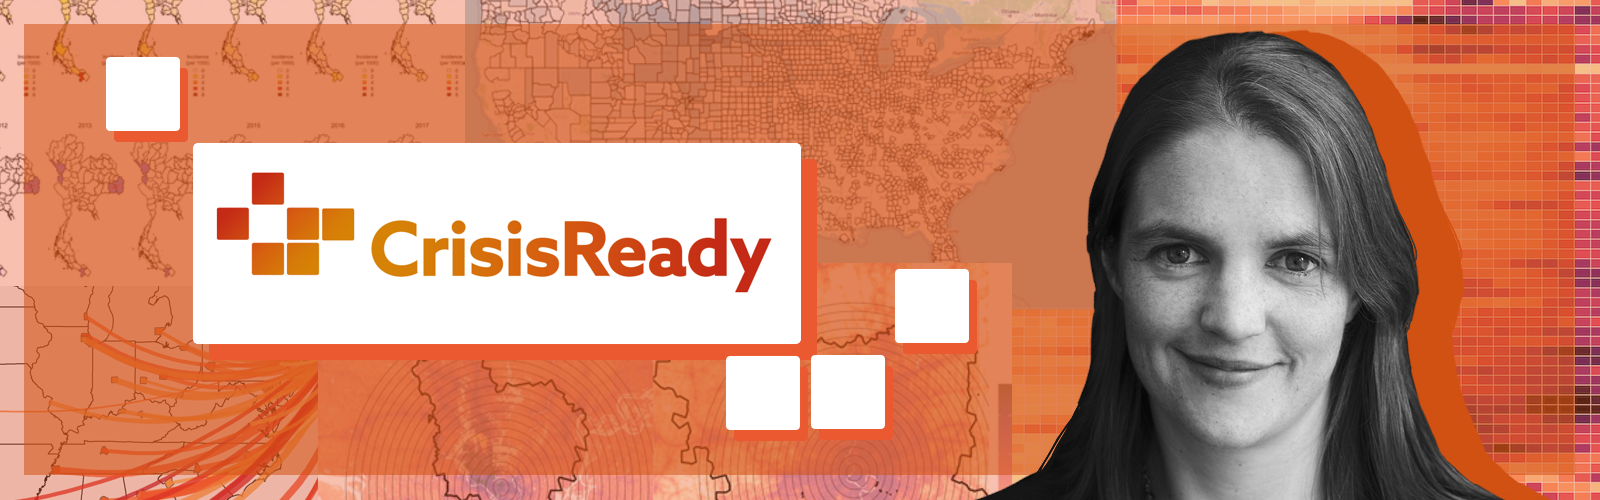 CrisisReady, led by Caroline Buckee, embeds data in local disaster planning